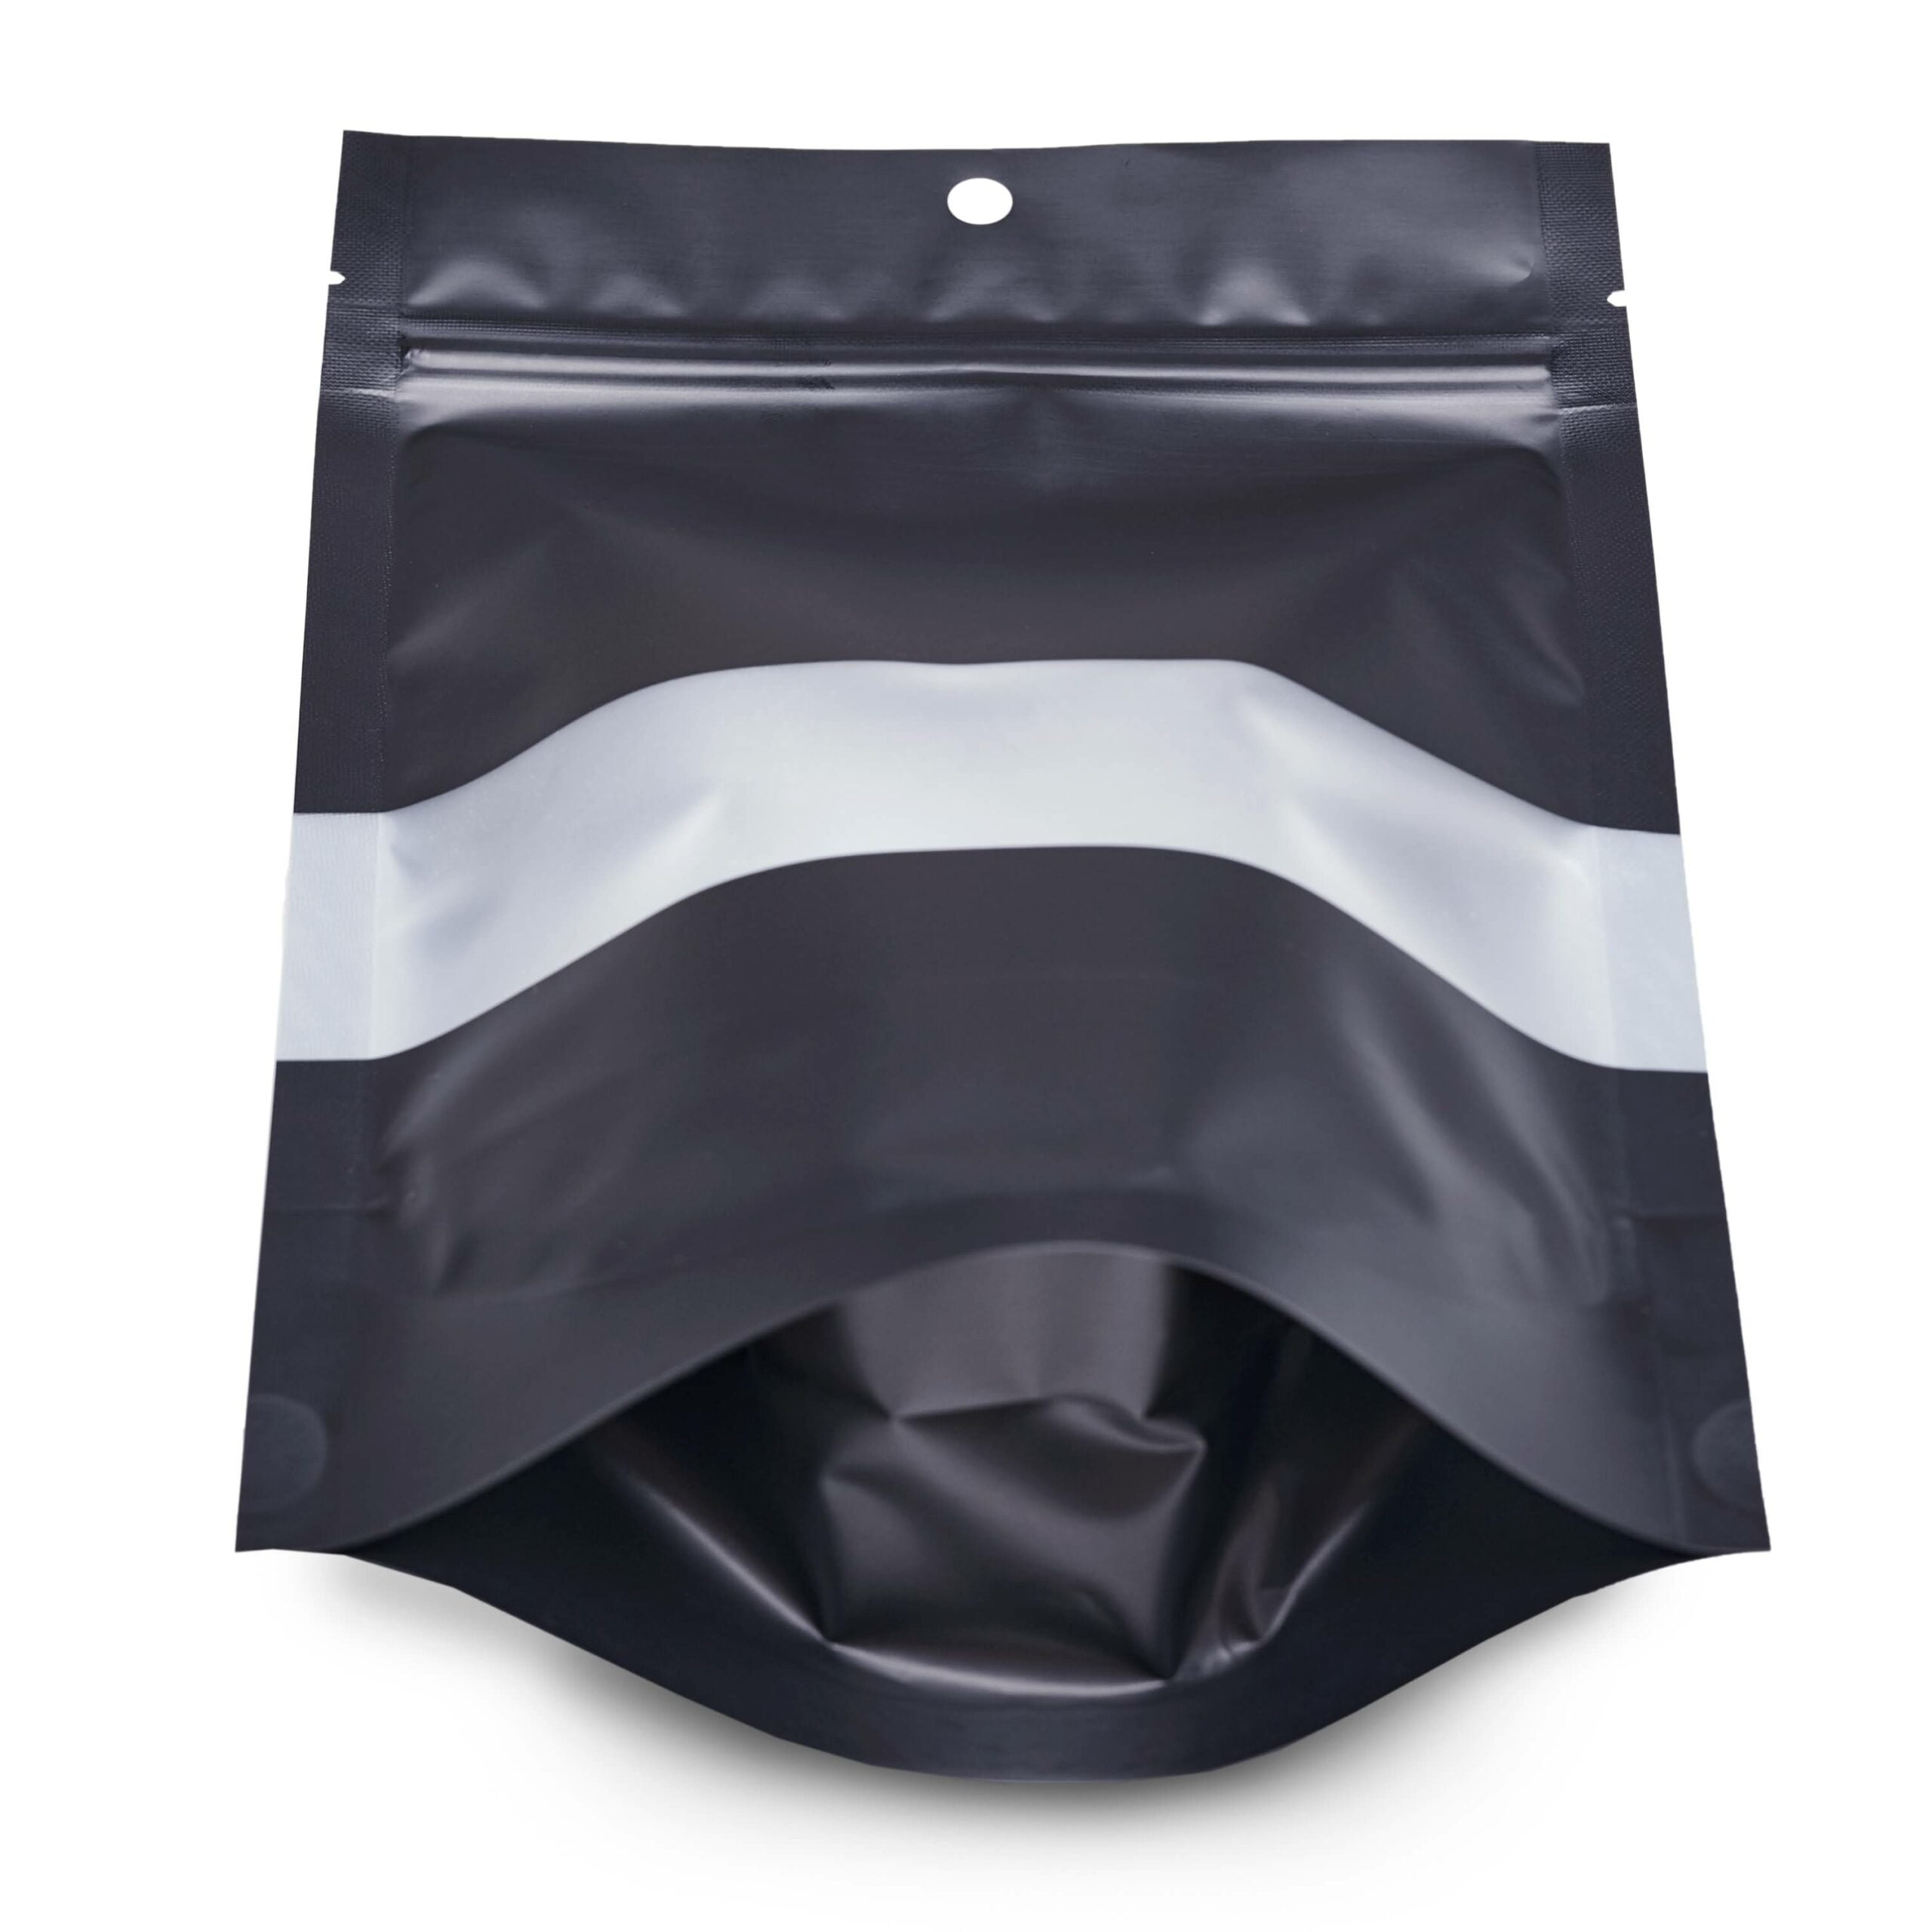 Matte Black Stand Up Zipper Bag with Vertical Window (1/8th oz